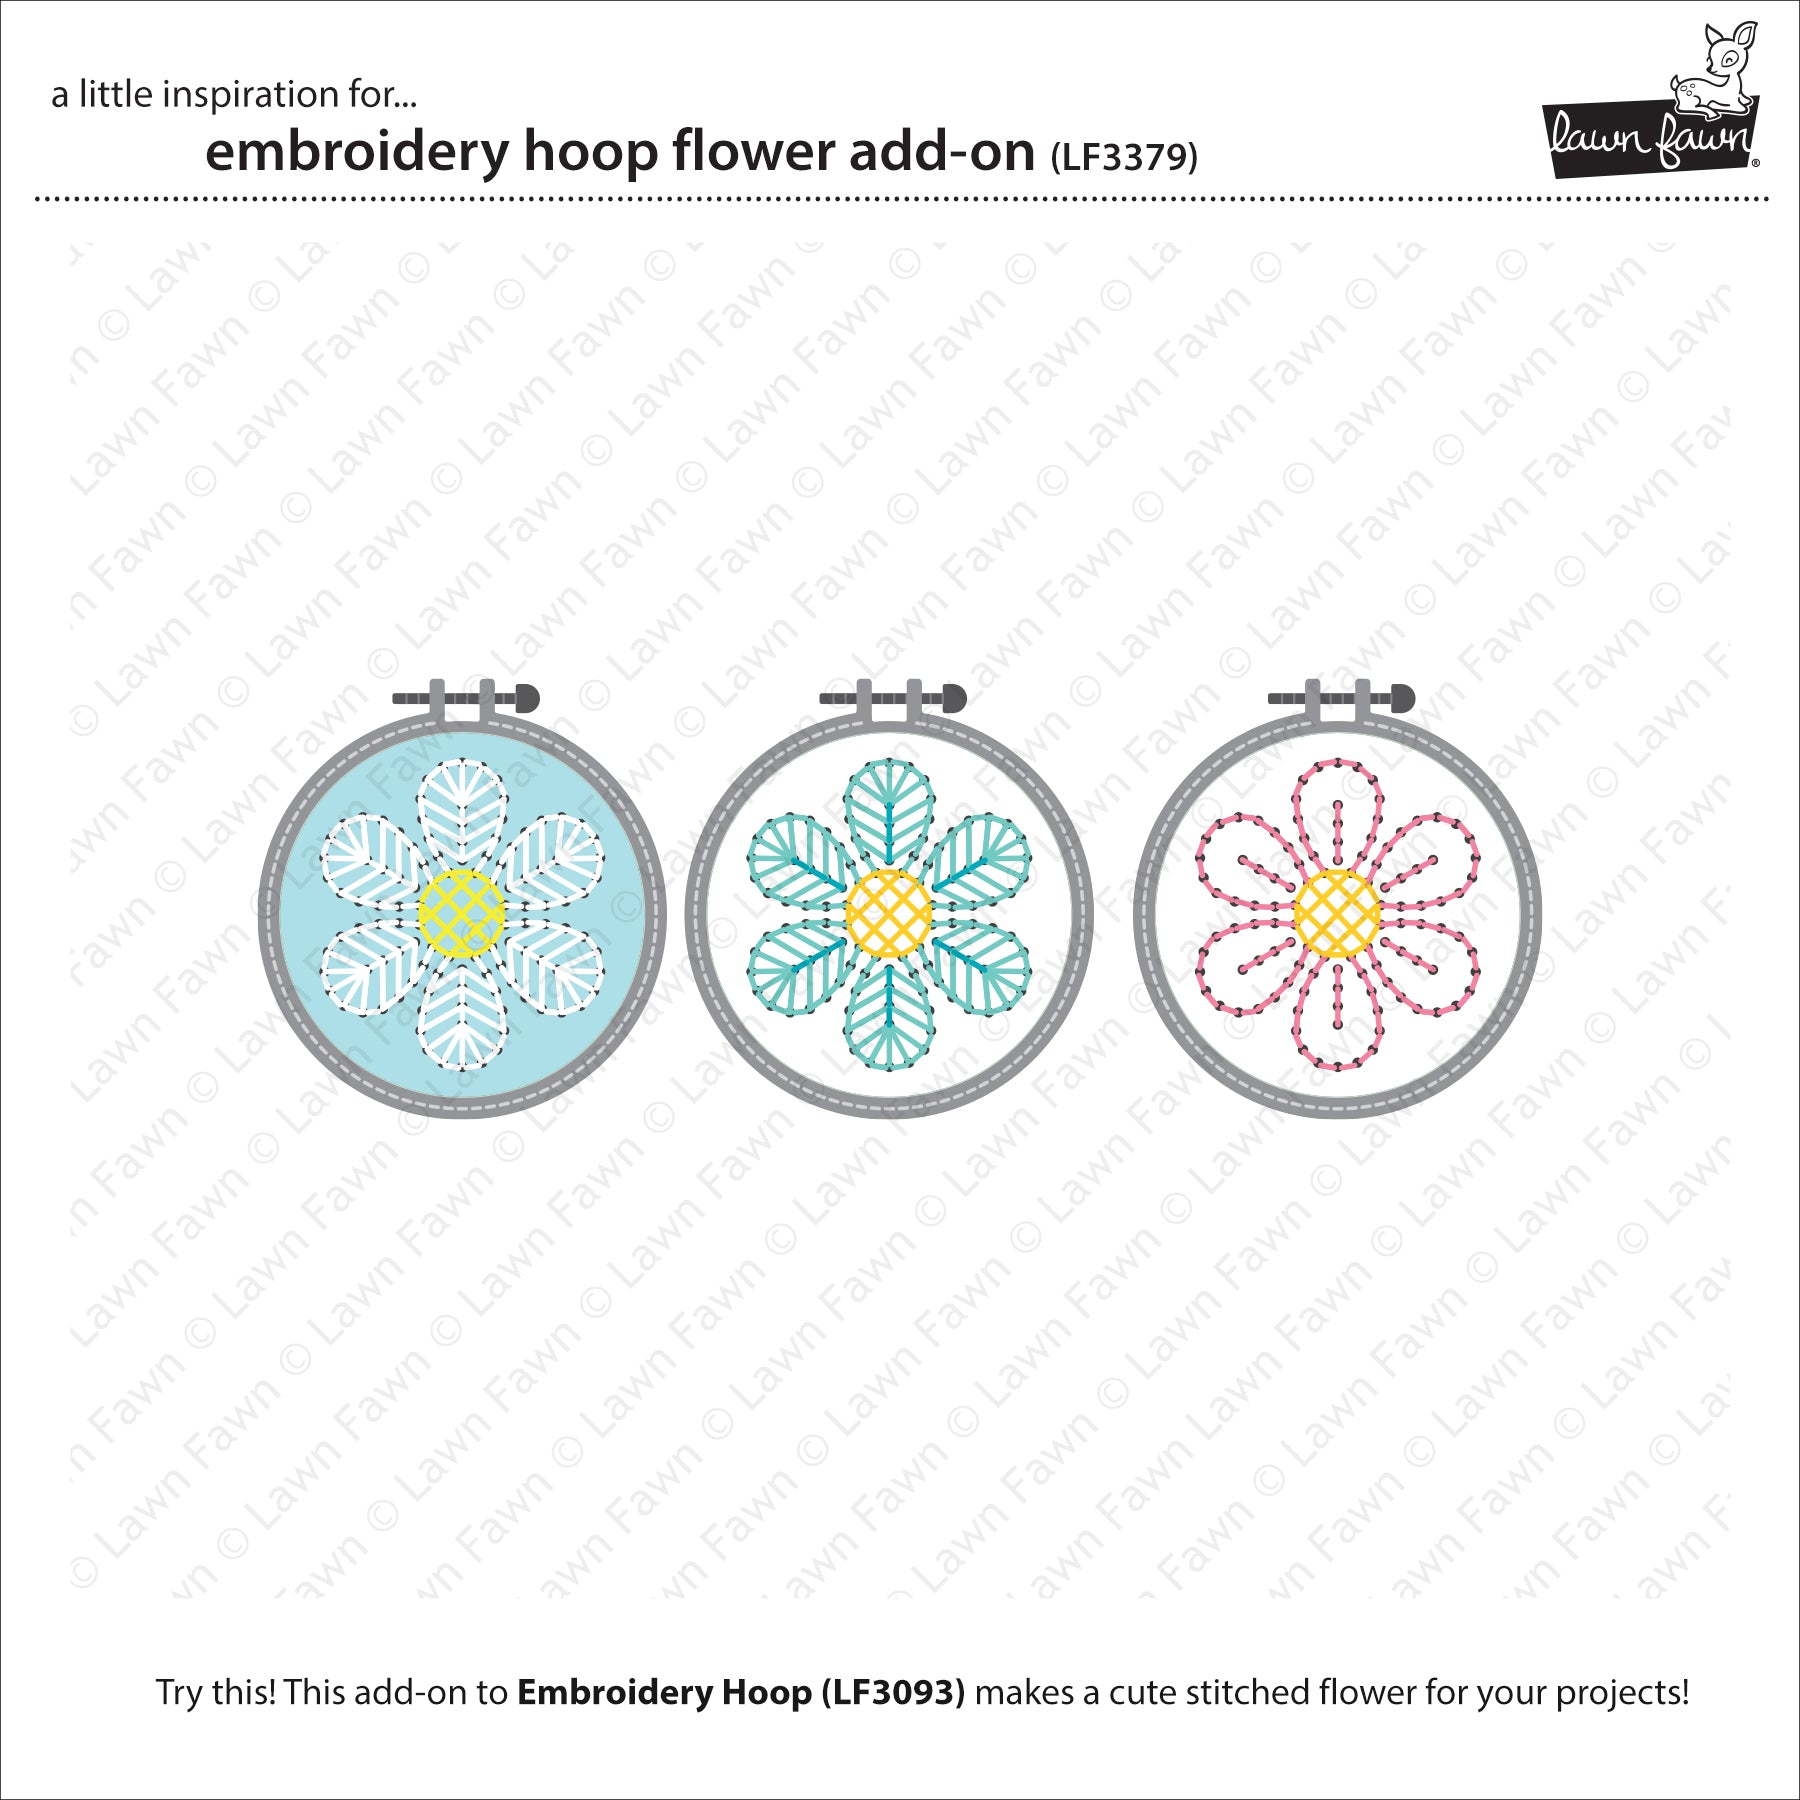 Lawn Fawn - Embroidery Hoop Flower Add-On